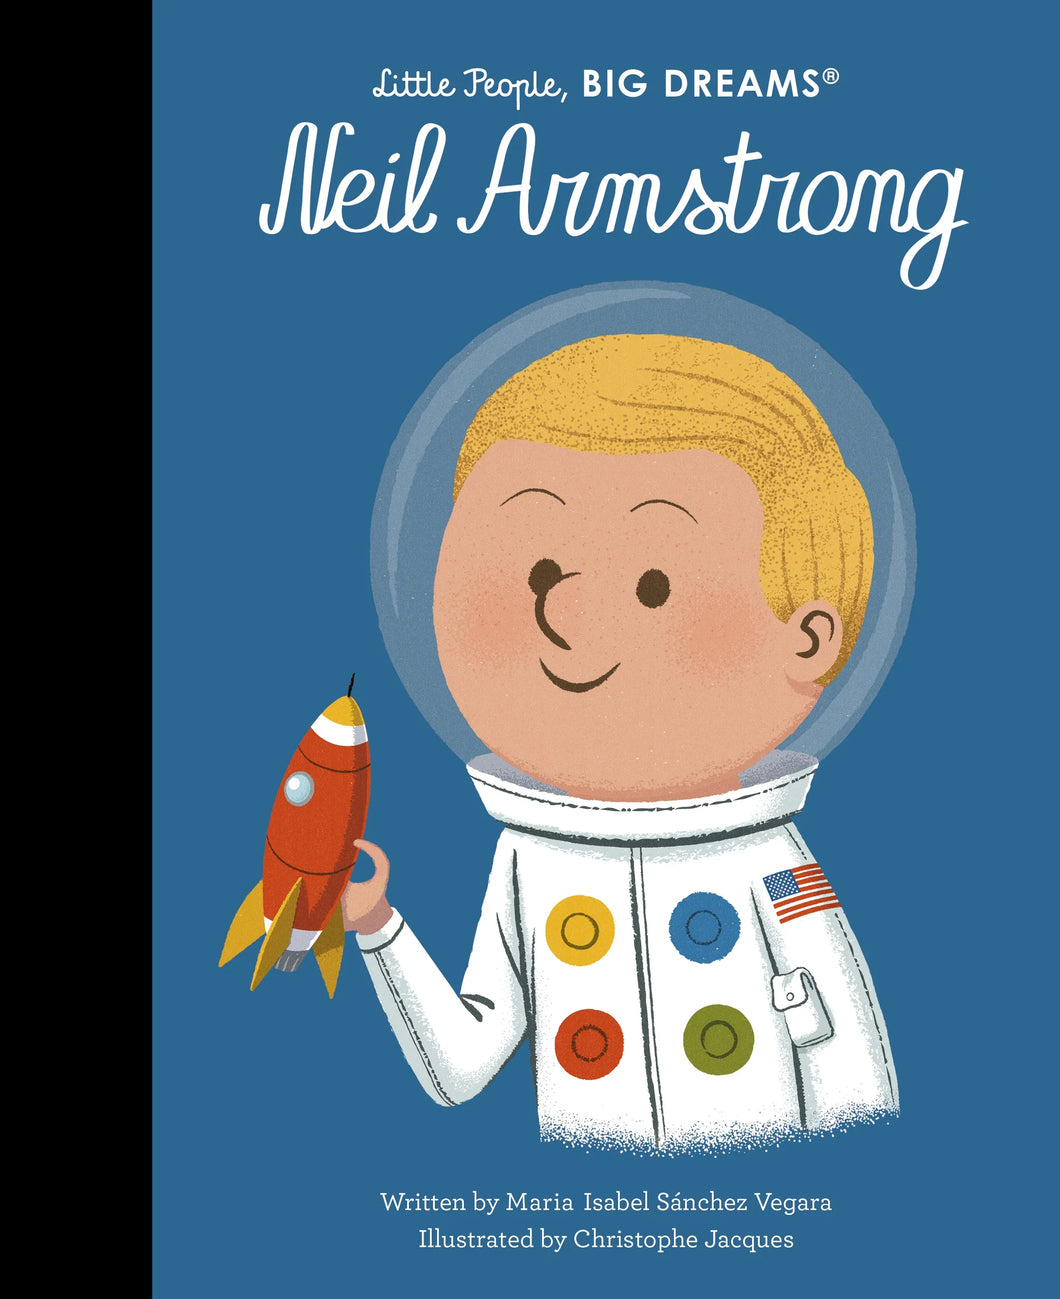 Little People, Big Dreams Book - Neil Armstrong